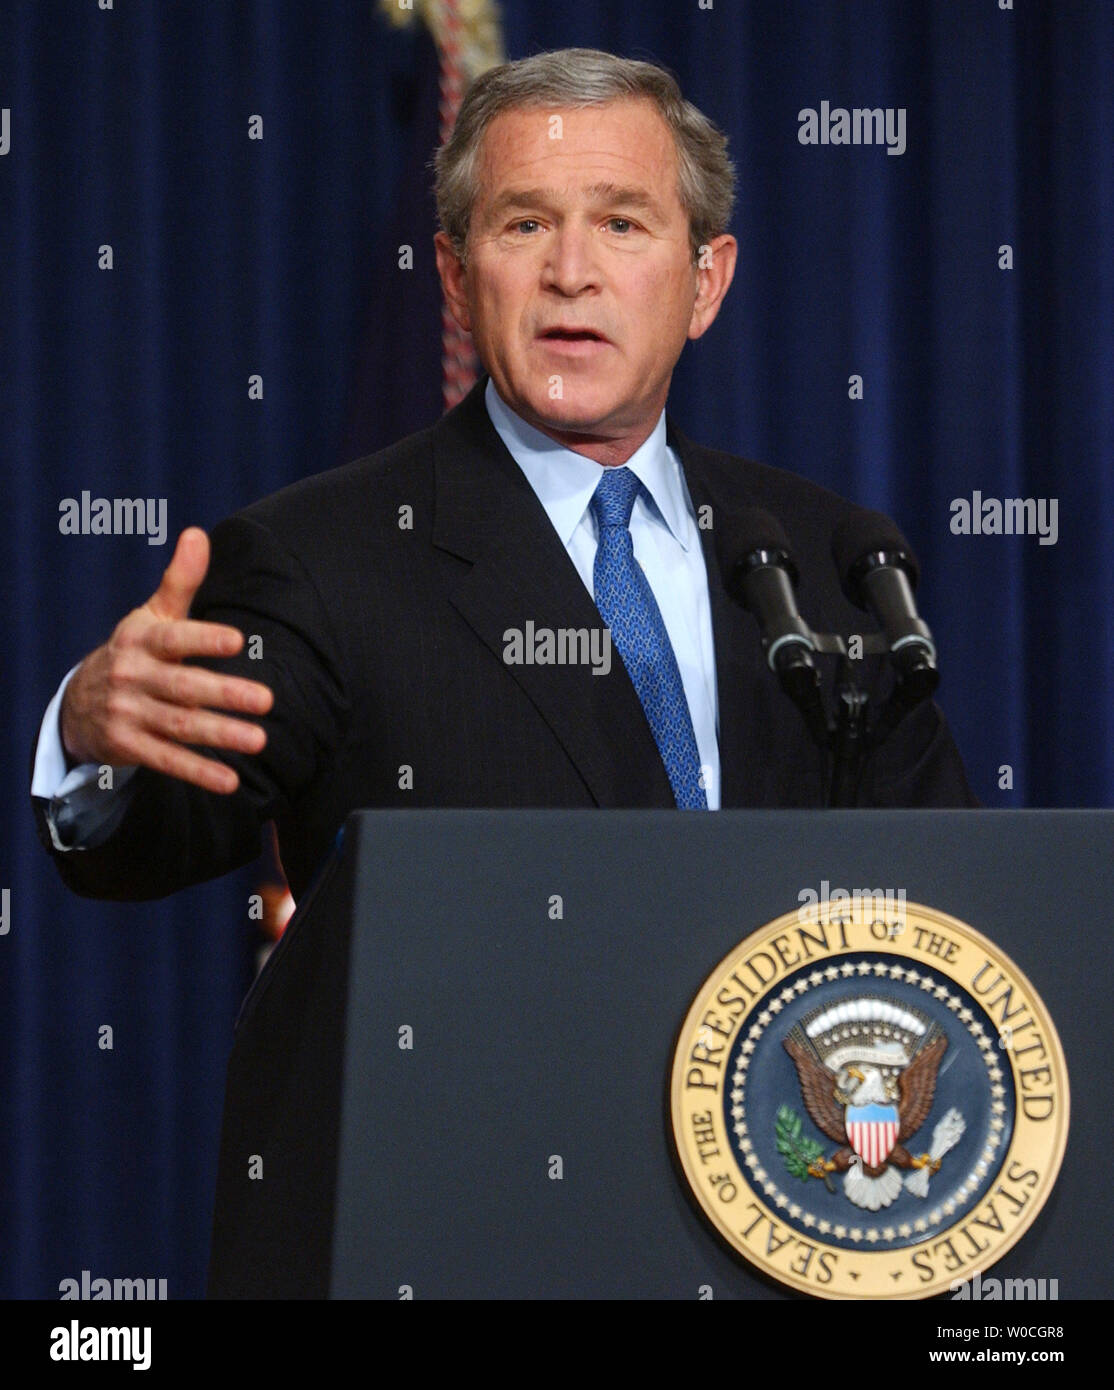 President George W. Bush speaks with members of the White House Press Corps during a final news conference of 2004 on December 20, 2004 in Washington.  Bush discussed domestic issues like Medicare and international issues like the war in Iraq and the Palestinian and Israeli conflict. (UPI Photo/Michael Kleinfeld) Stock Photo